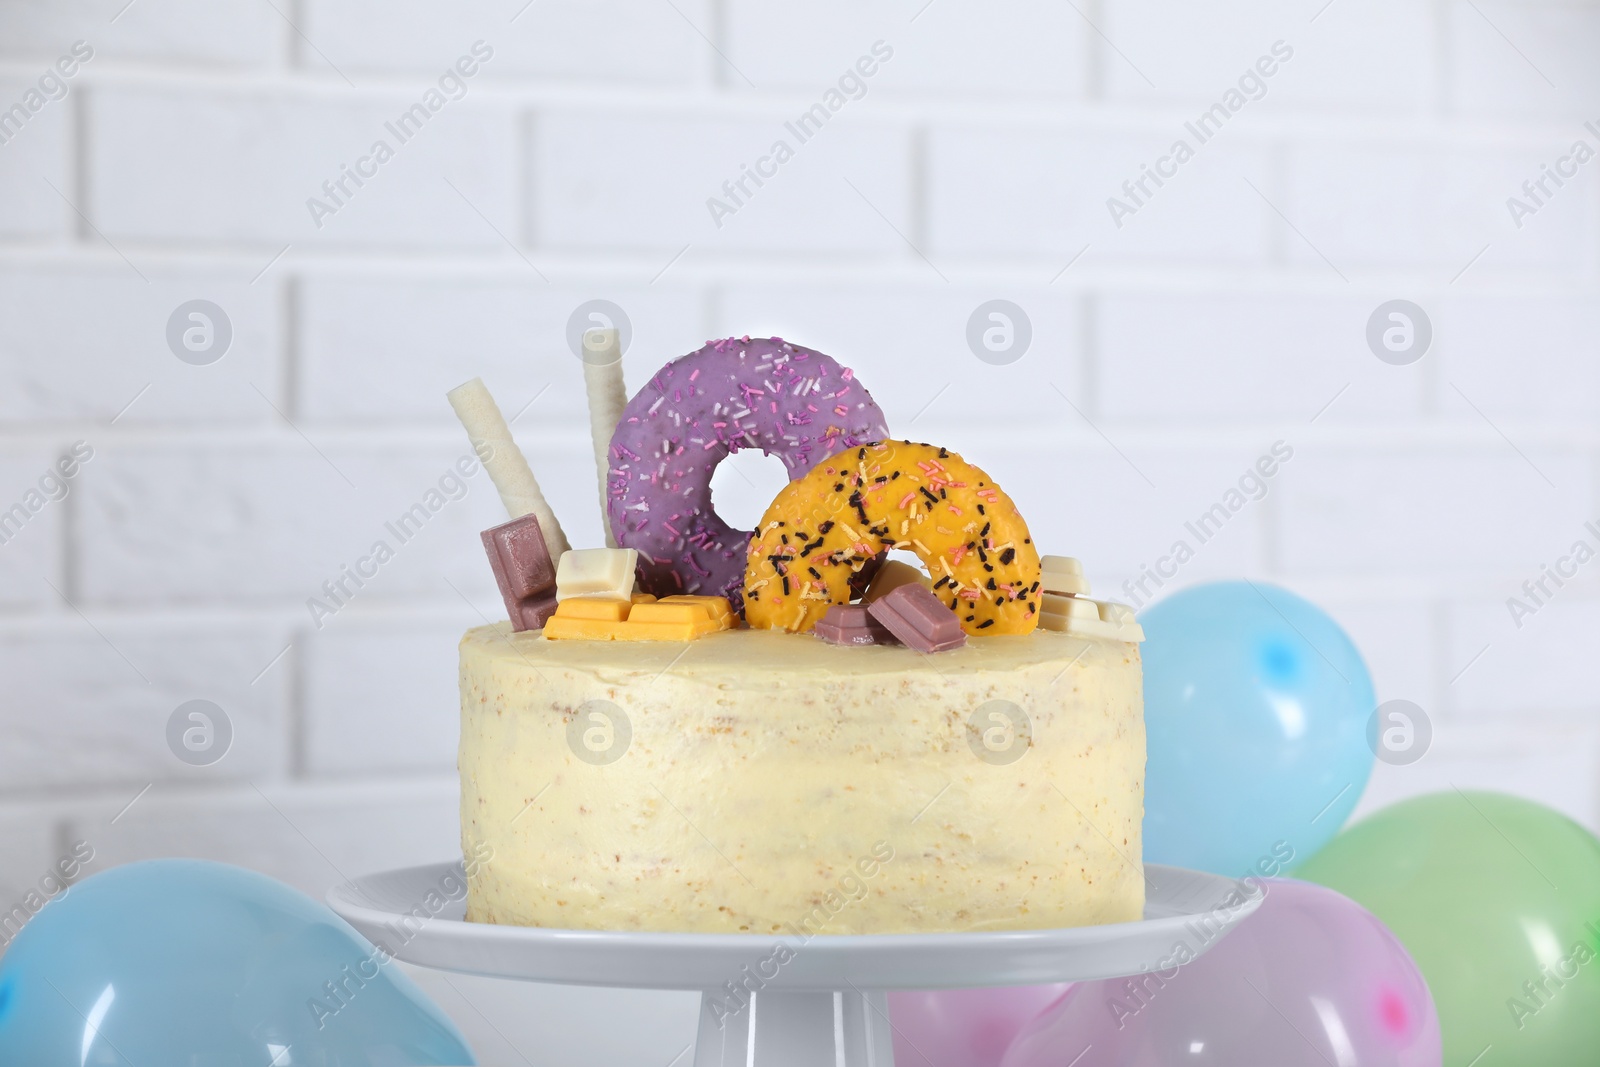 Photo of Delicious cake decorated with sweets and balloons against white brick wall